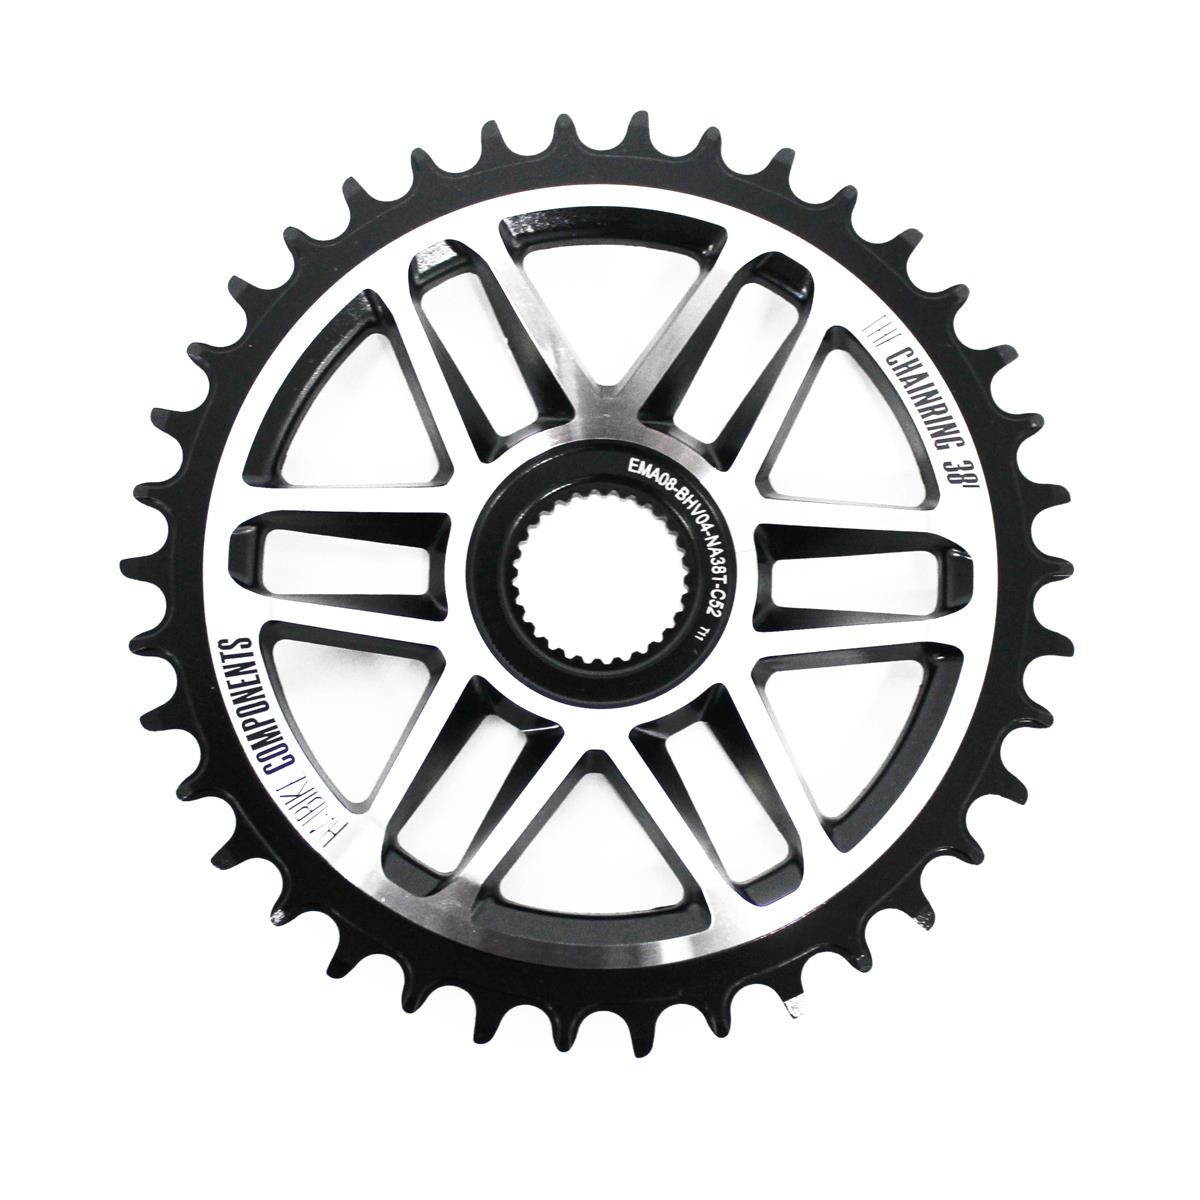 Chainring 38t direct mount for models with Yamaha PW-X2 engine from 2020